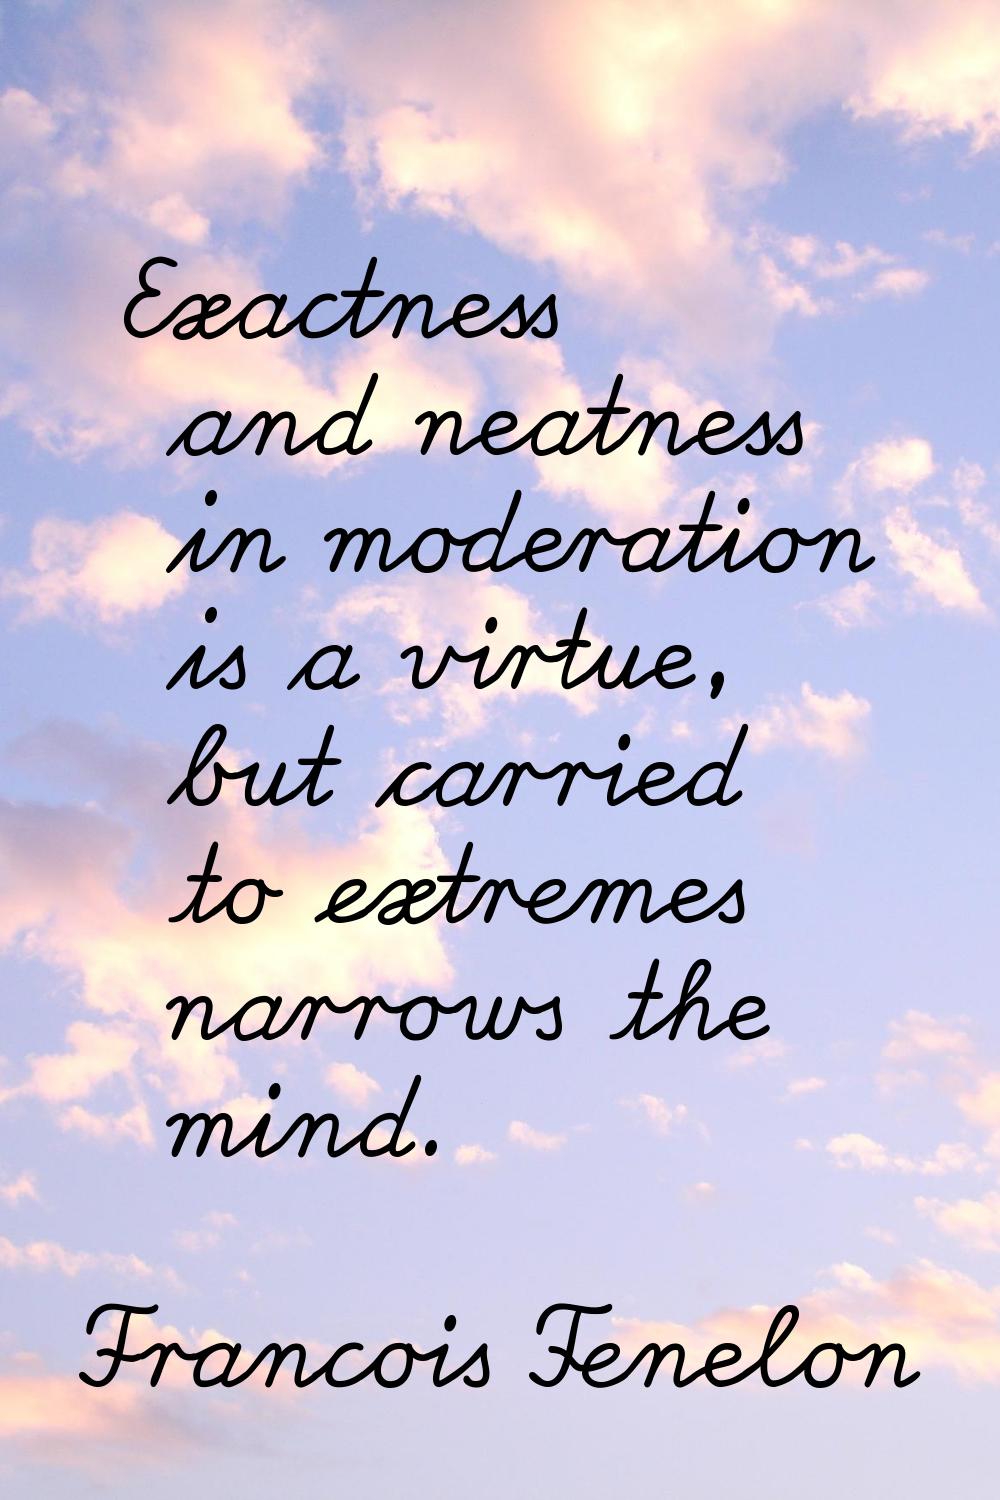 Exactness and neatness in moderation is a virtue, but carried to extremes narrows the mind.